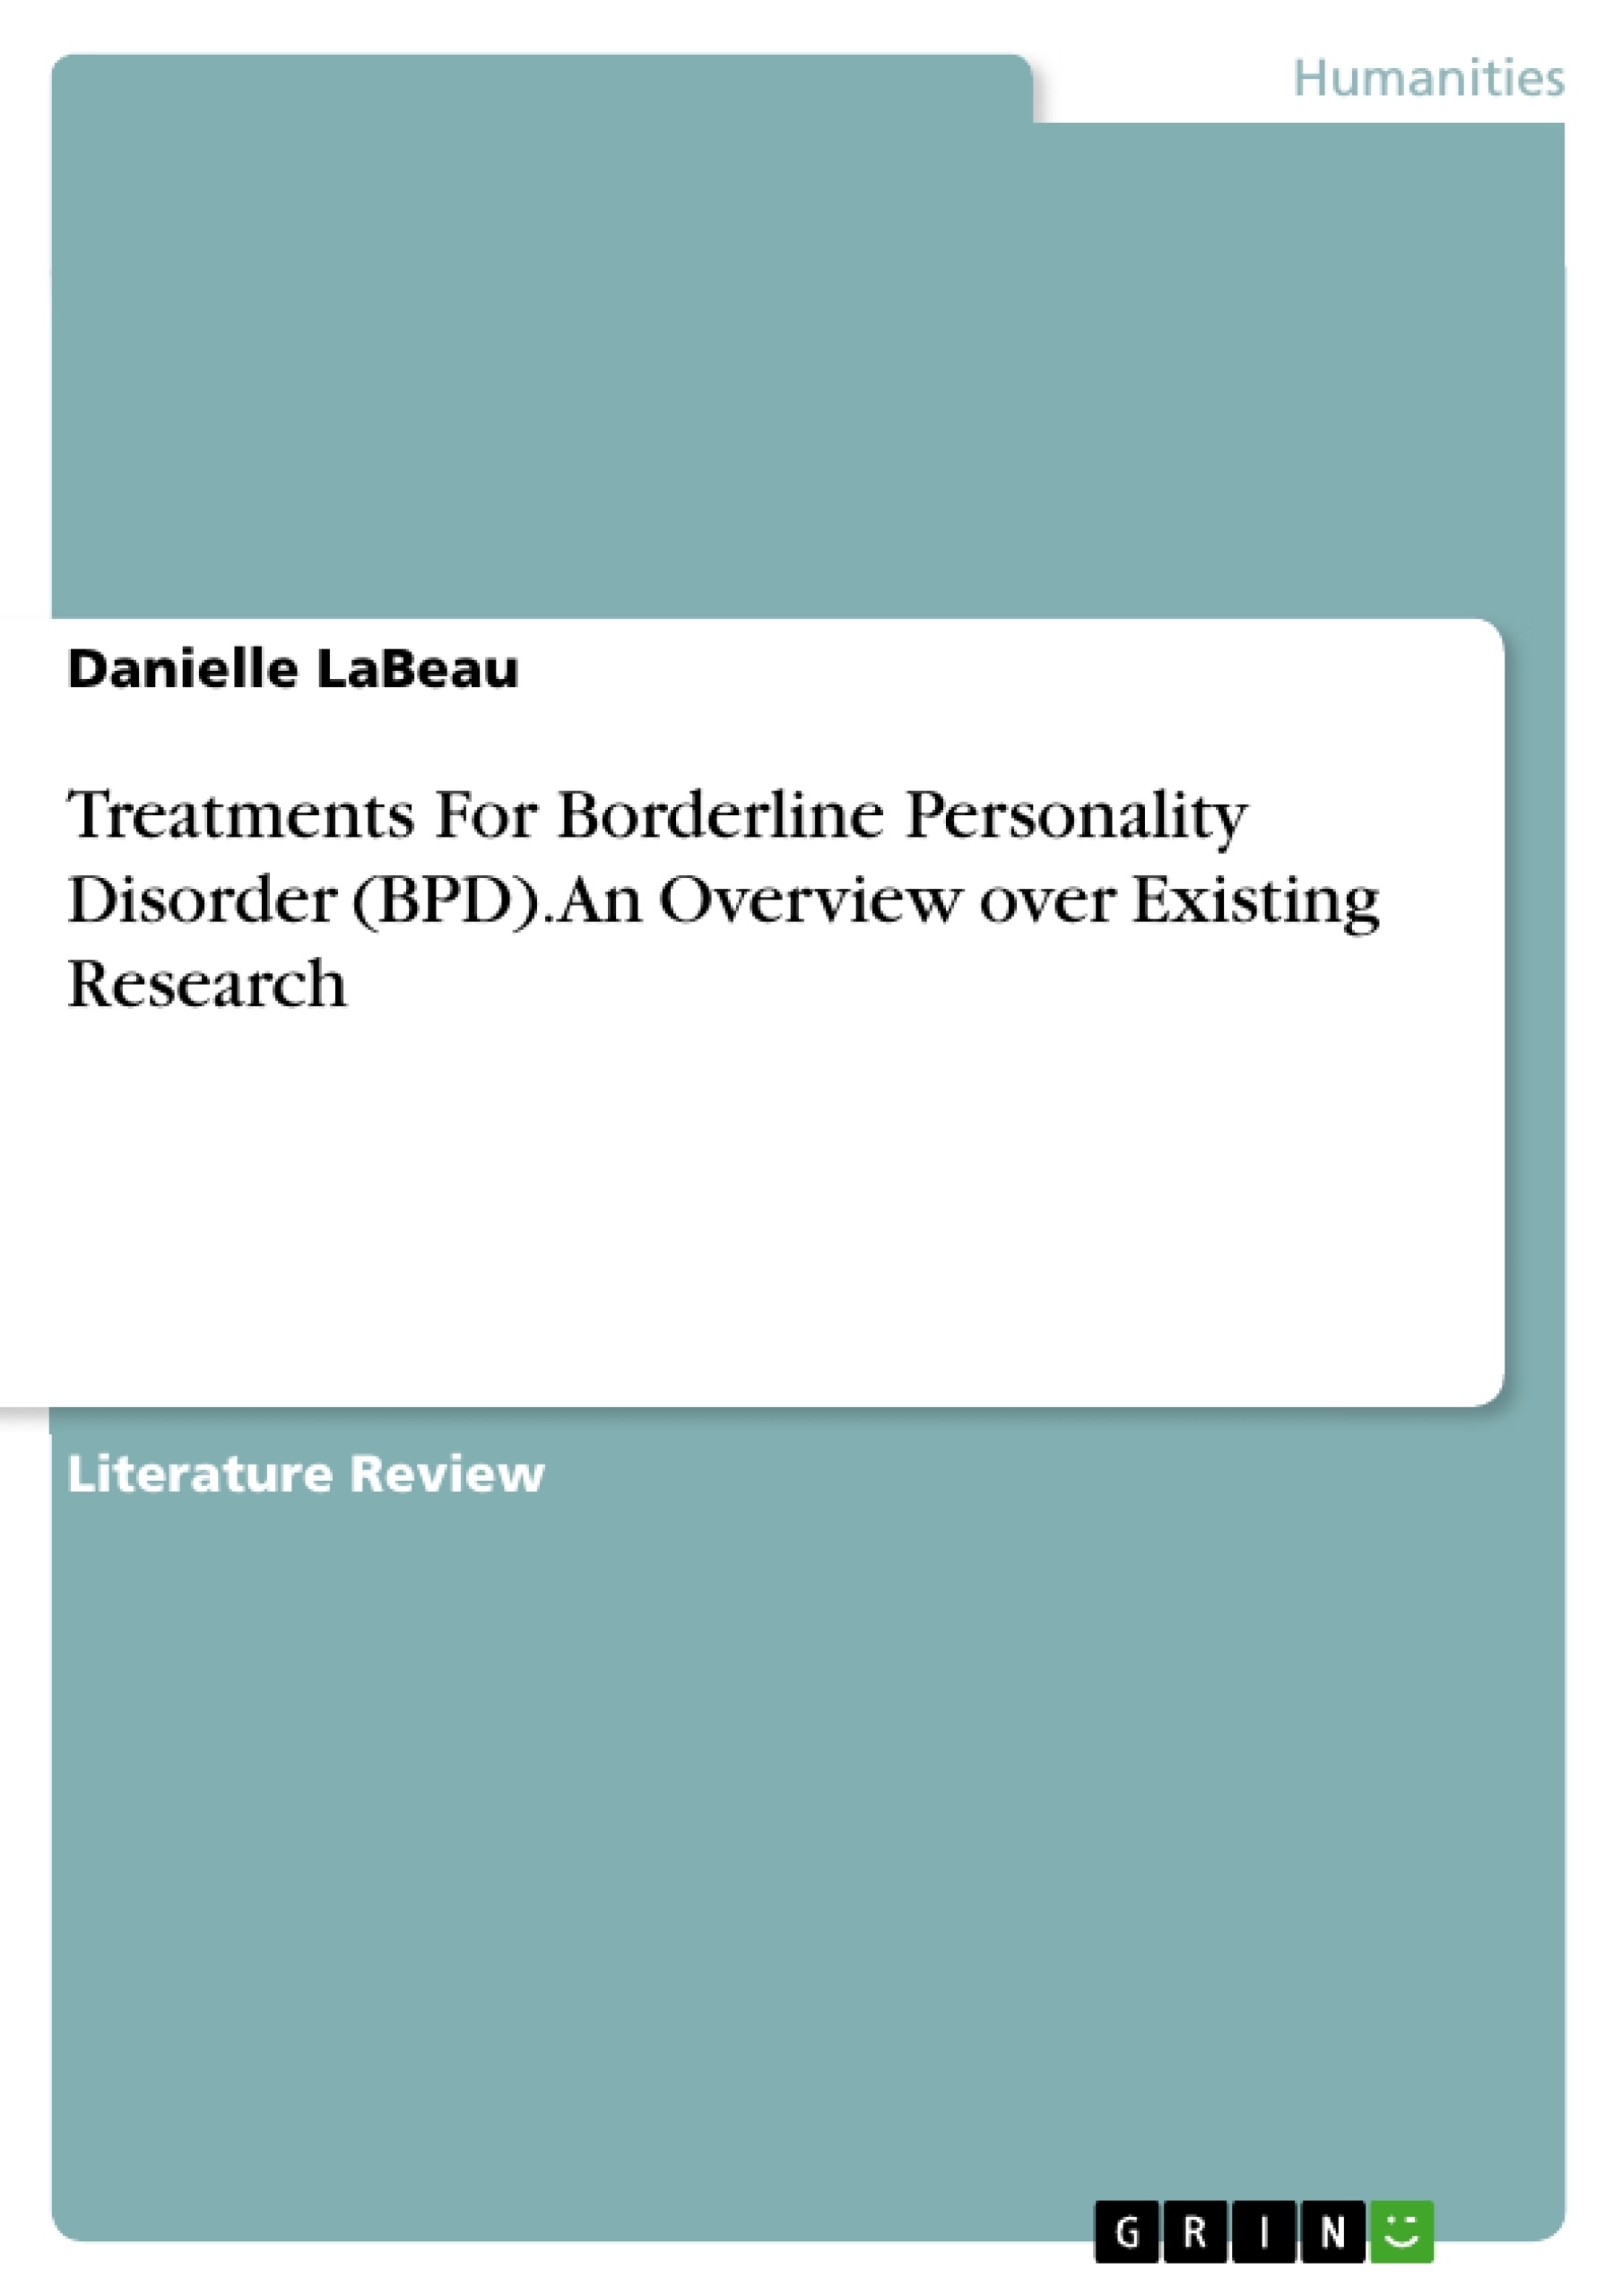 Title: Treatments For Borderline Personality Disorder (BPD). An Overview over Existing Research